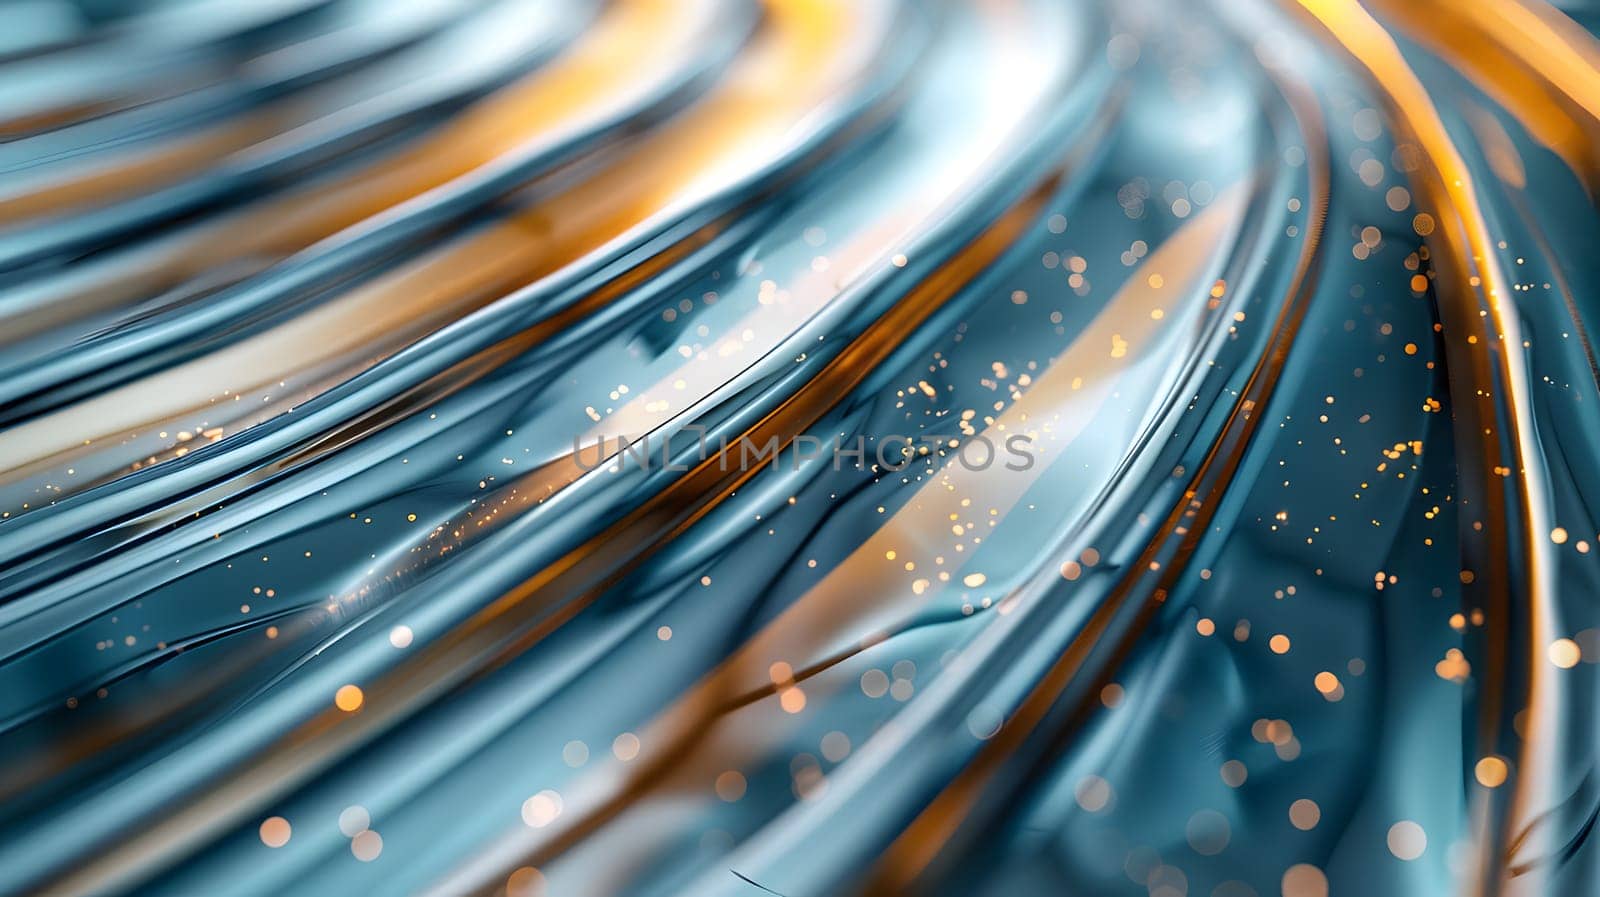 Macro photography of a liquid swirl pattern in electric blue and gold with sparkles, resembling an automotive tire or cable wire in a mesmerizing design